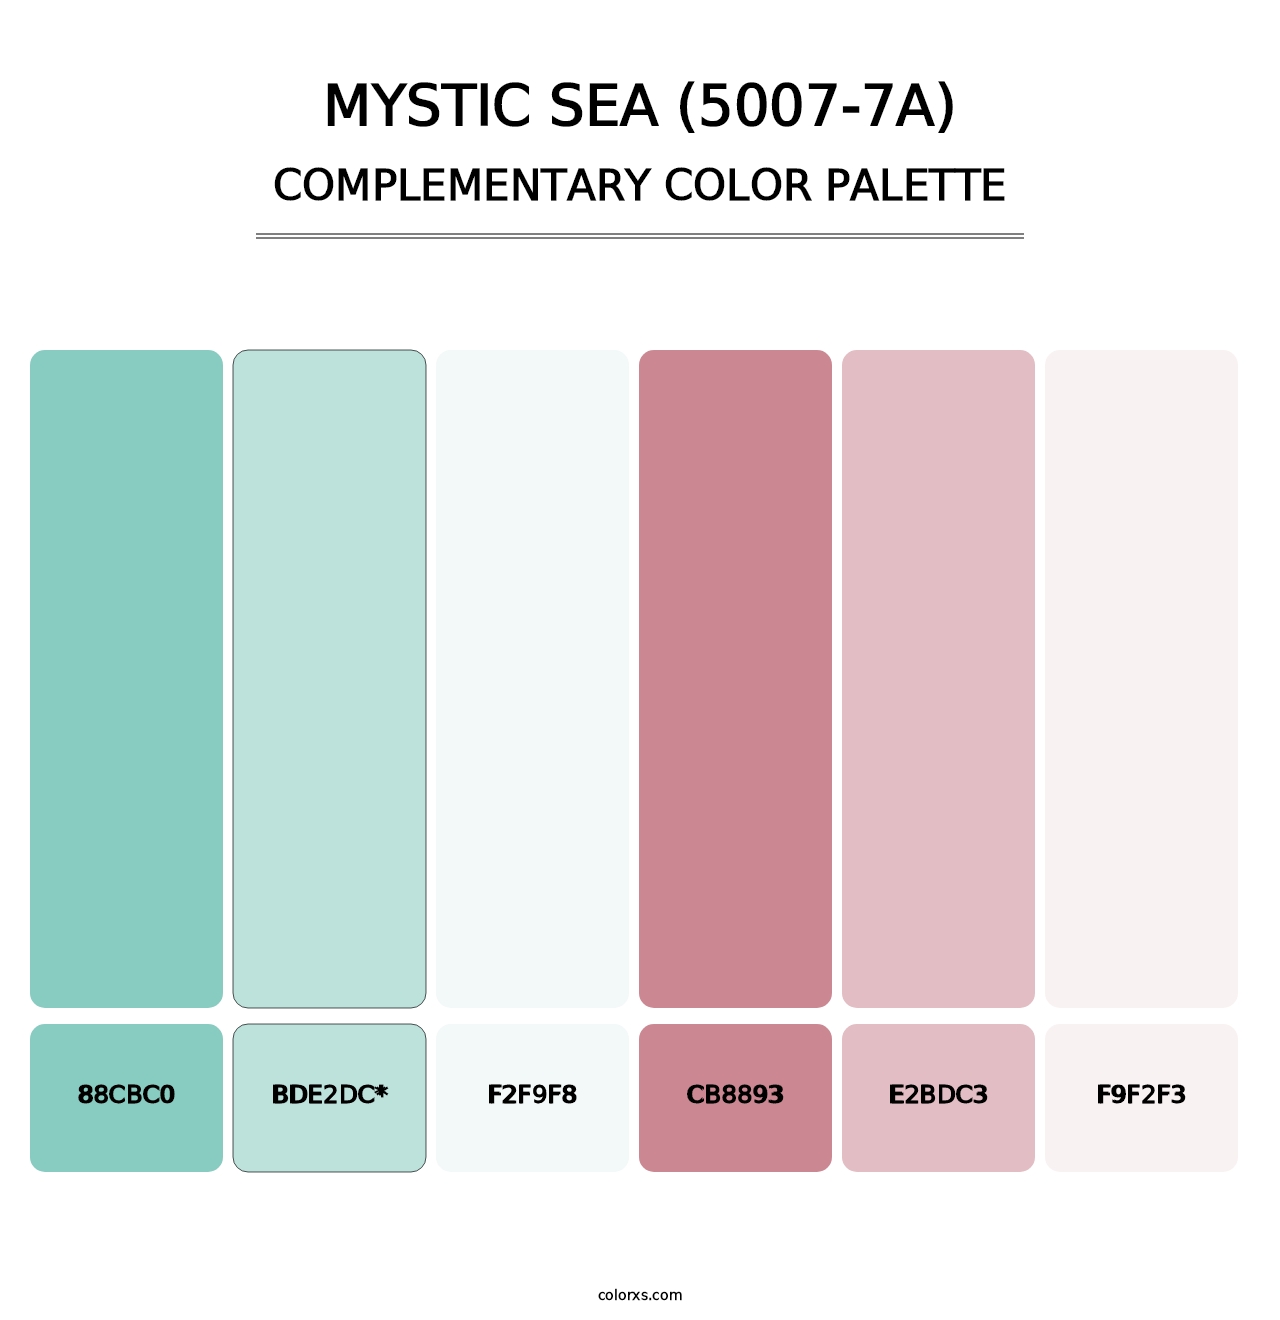 Mystic Sea (5007-7A) - Complementary Color Palette